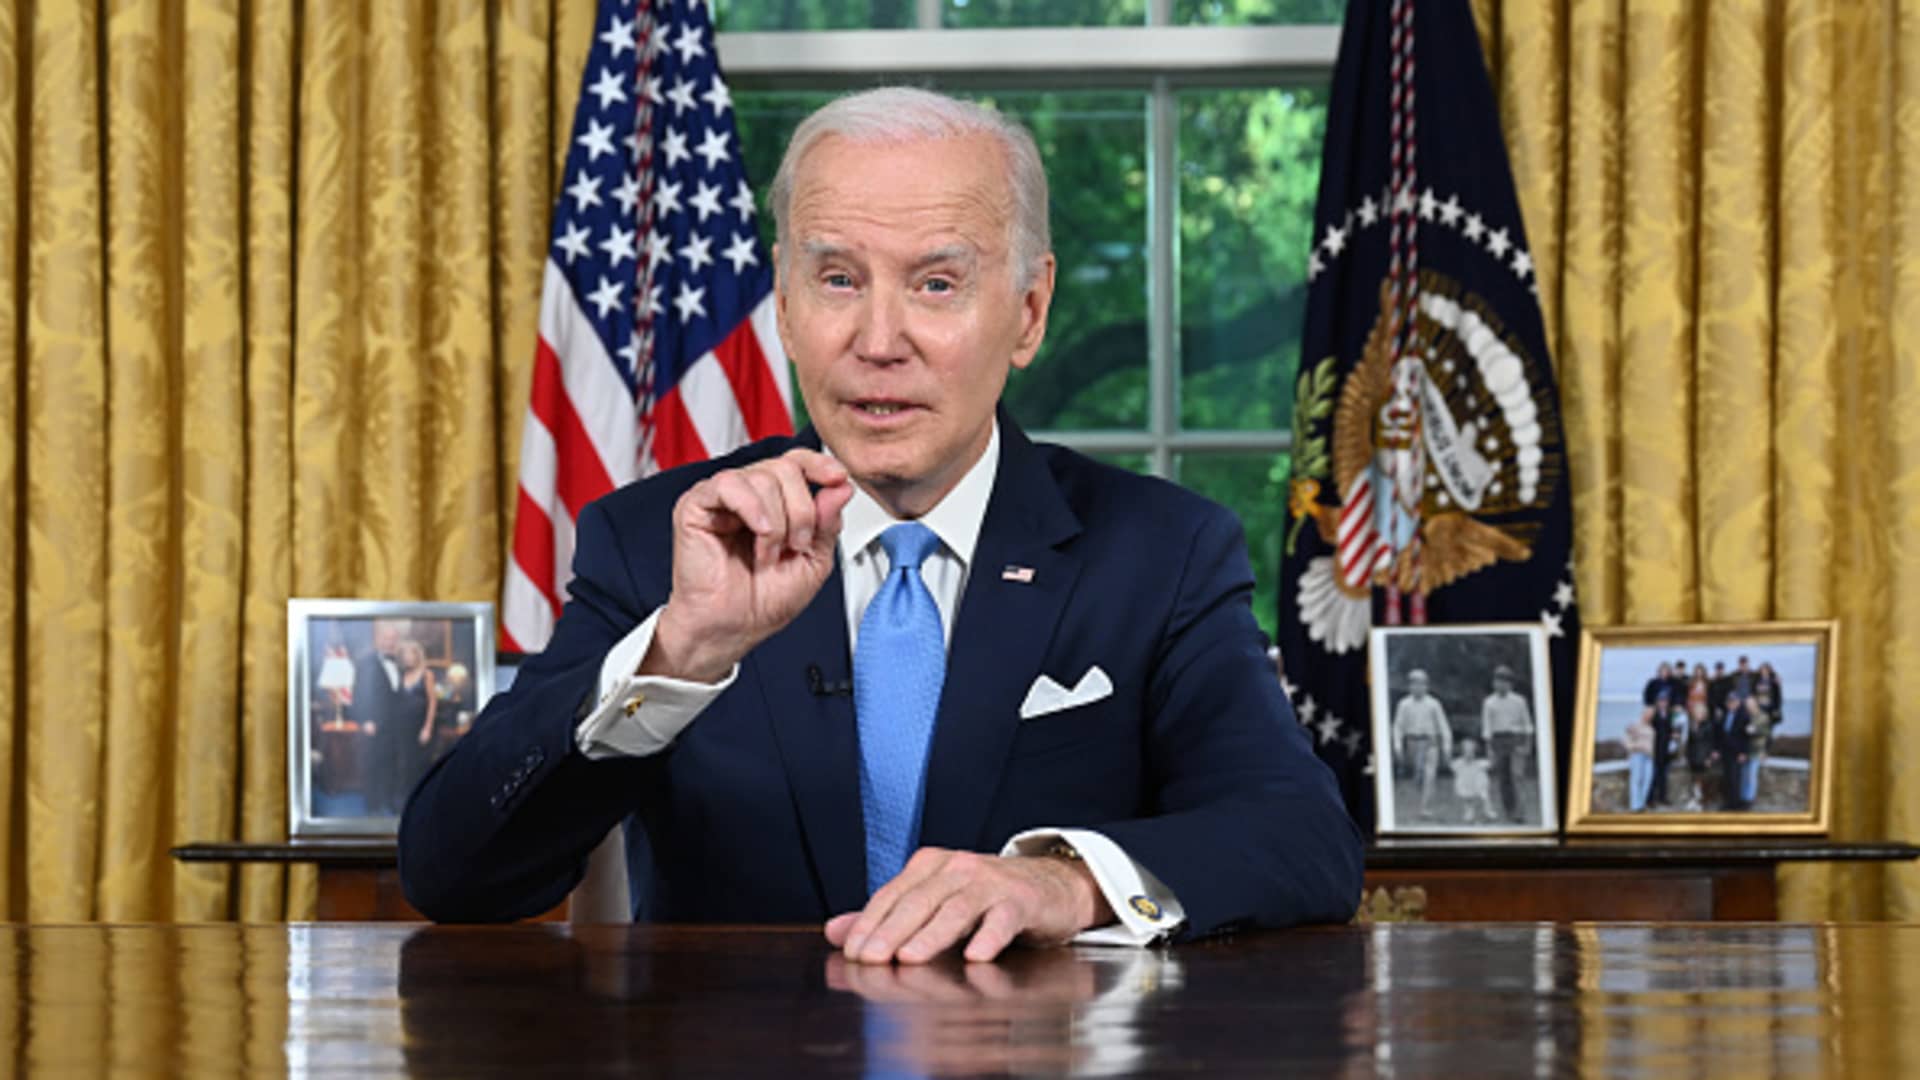 US President Joe Biden during a national address in the Oval Office of the White House in Washington, DC, US, on Friday, June 2, 2023.